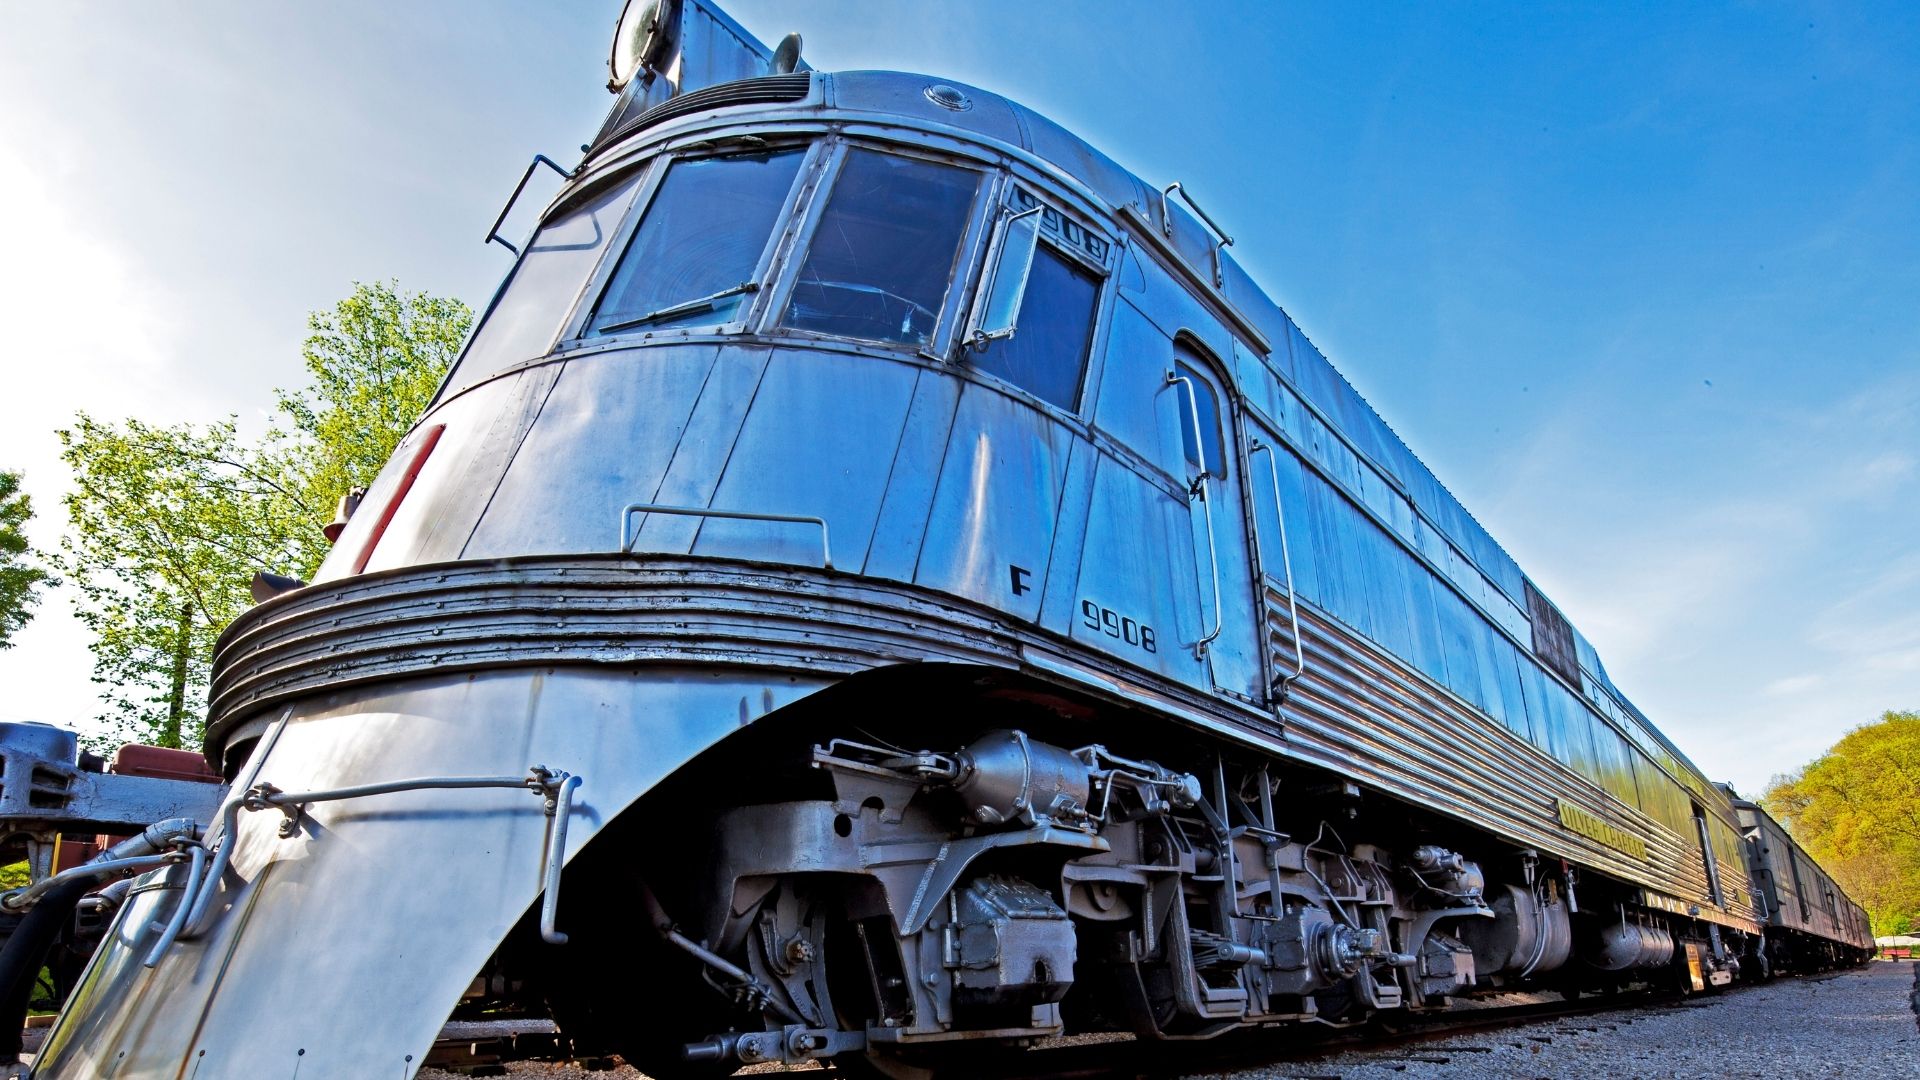 Visitors can get up close and personal with trains at the National Museum of Transportation.